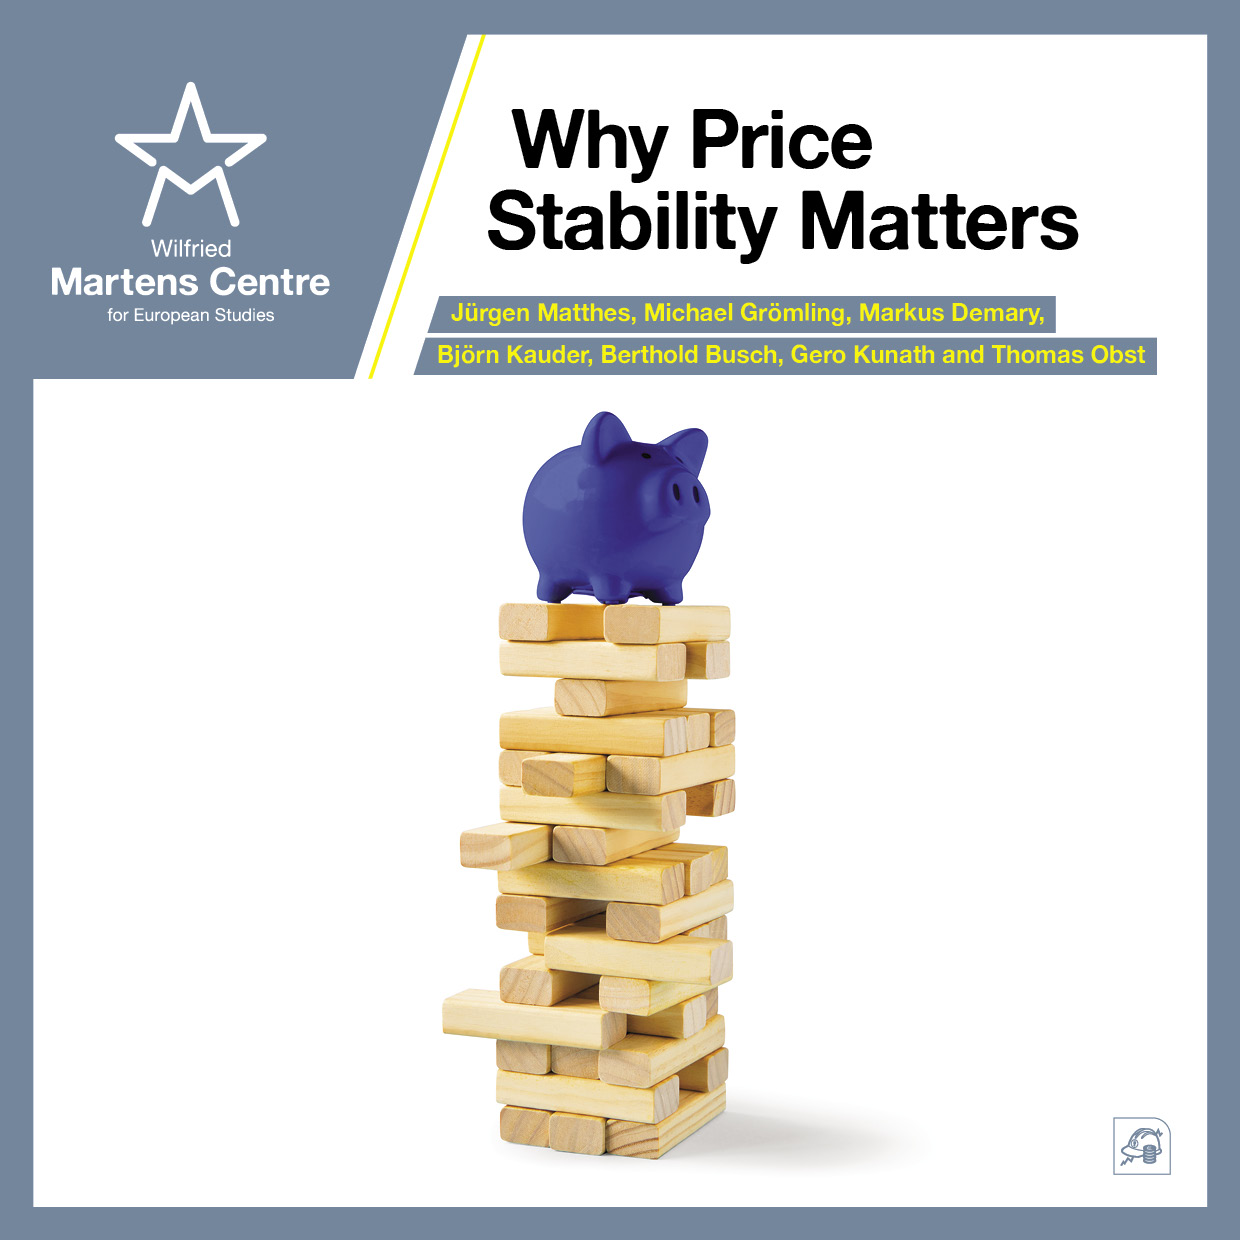 Why Price Stability Matters